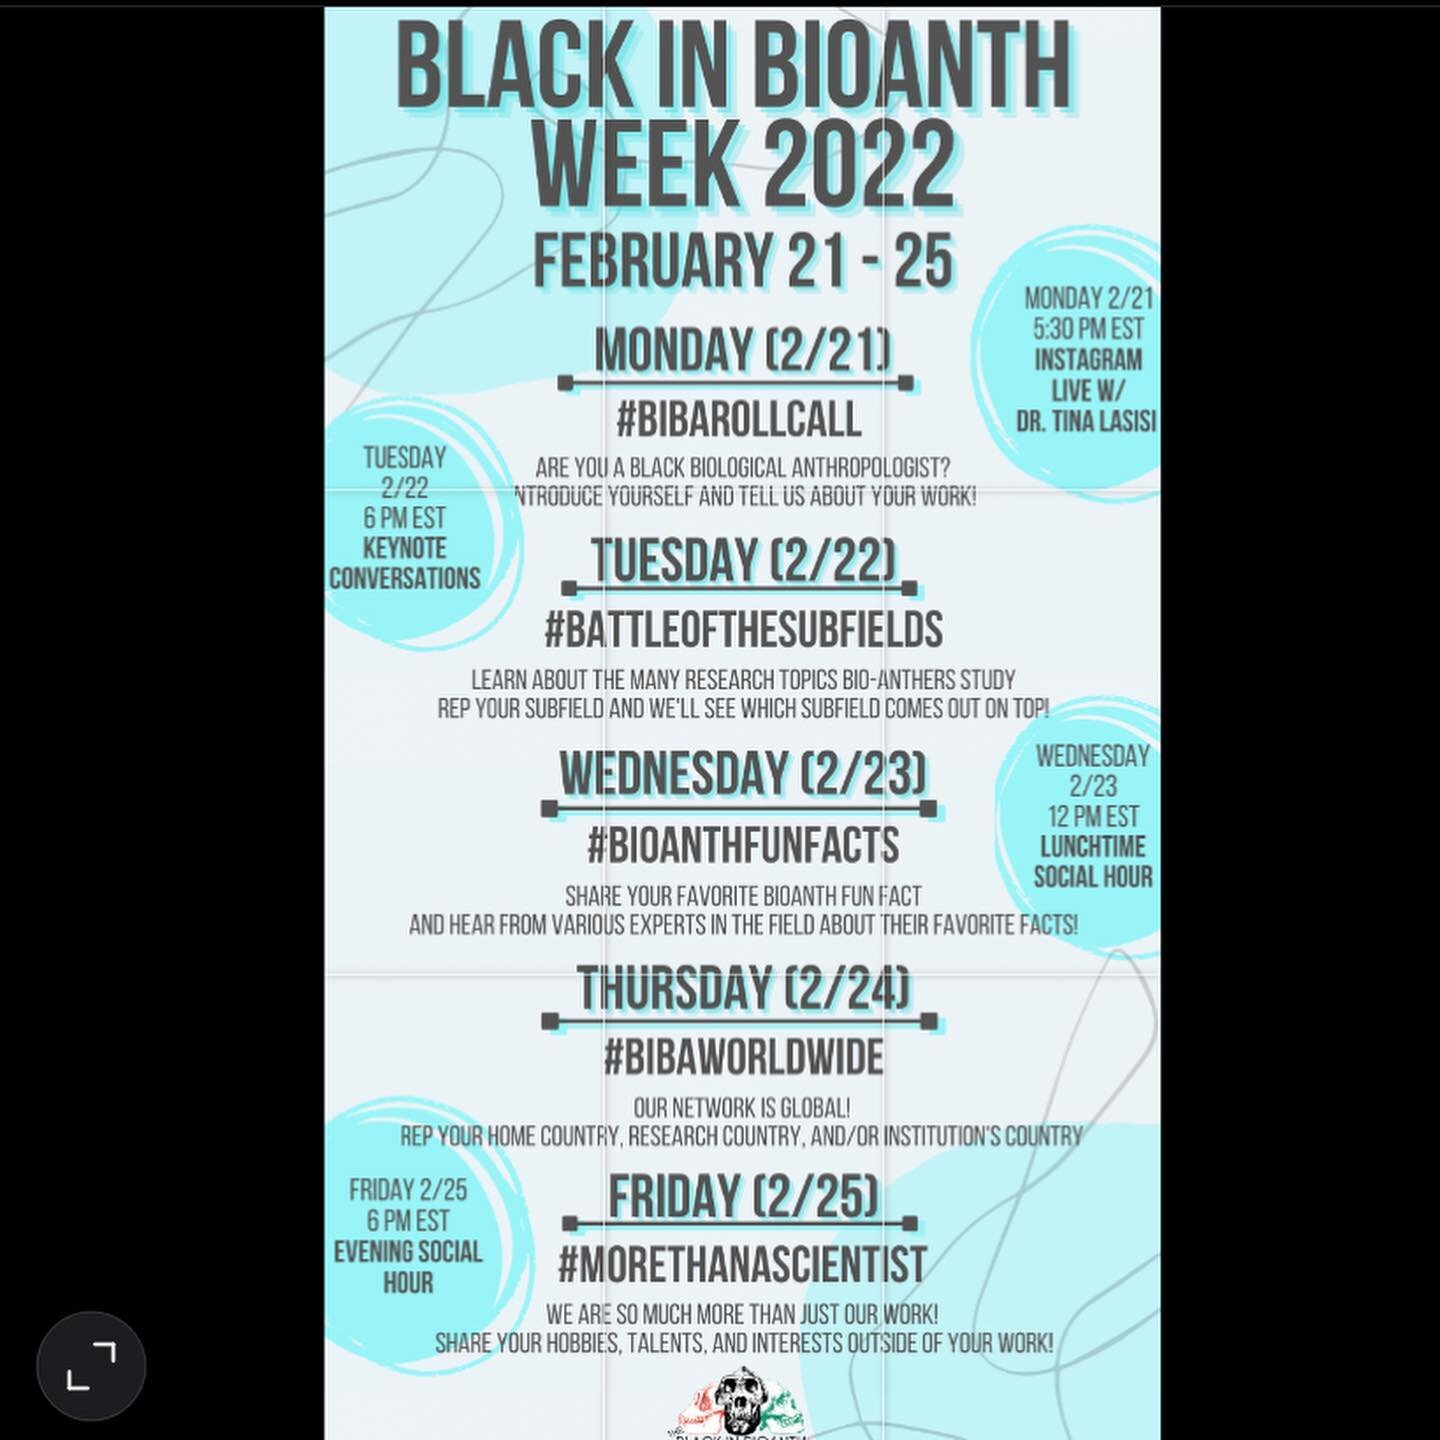 #BiBAWeek2022 is almost here!! We kick off our annual celebration of Black biological anthropologists and their work next Monday! We wi be hosting several events, including an #instagramlive featuring Dr. @tinalasisi, a keynote talk with Drs. Denn&ea